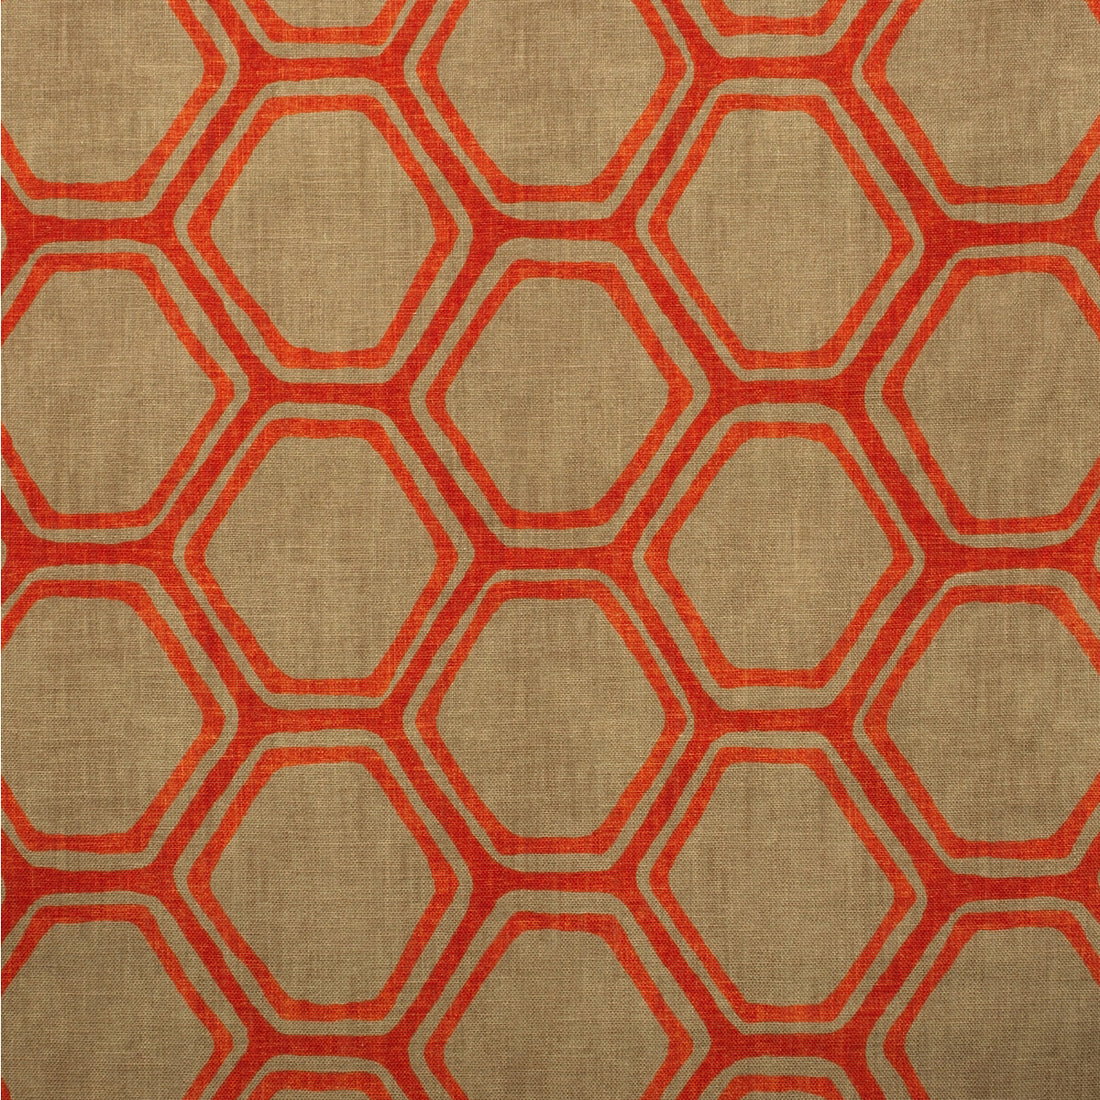 Pergola fabric in nutmeg color - pattern AM100408.612.0 - by Kravet Couture in the Andrew Martin The Secret Garden collection